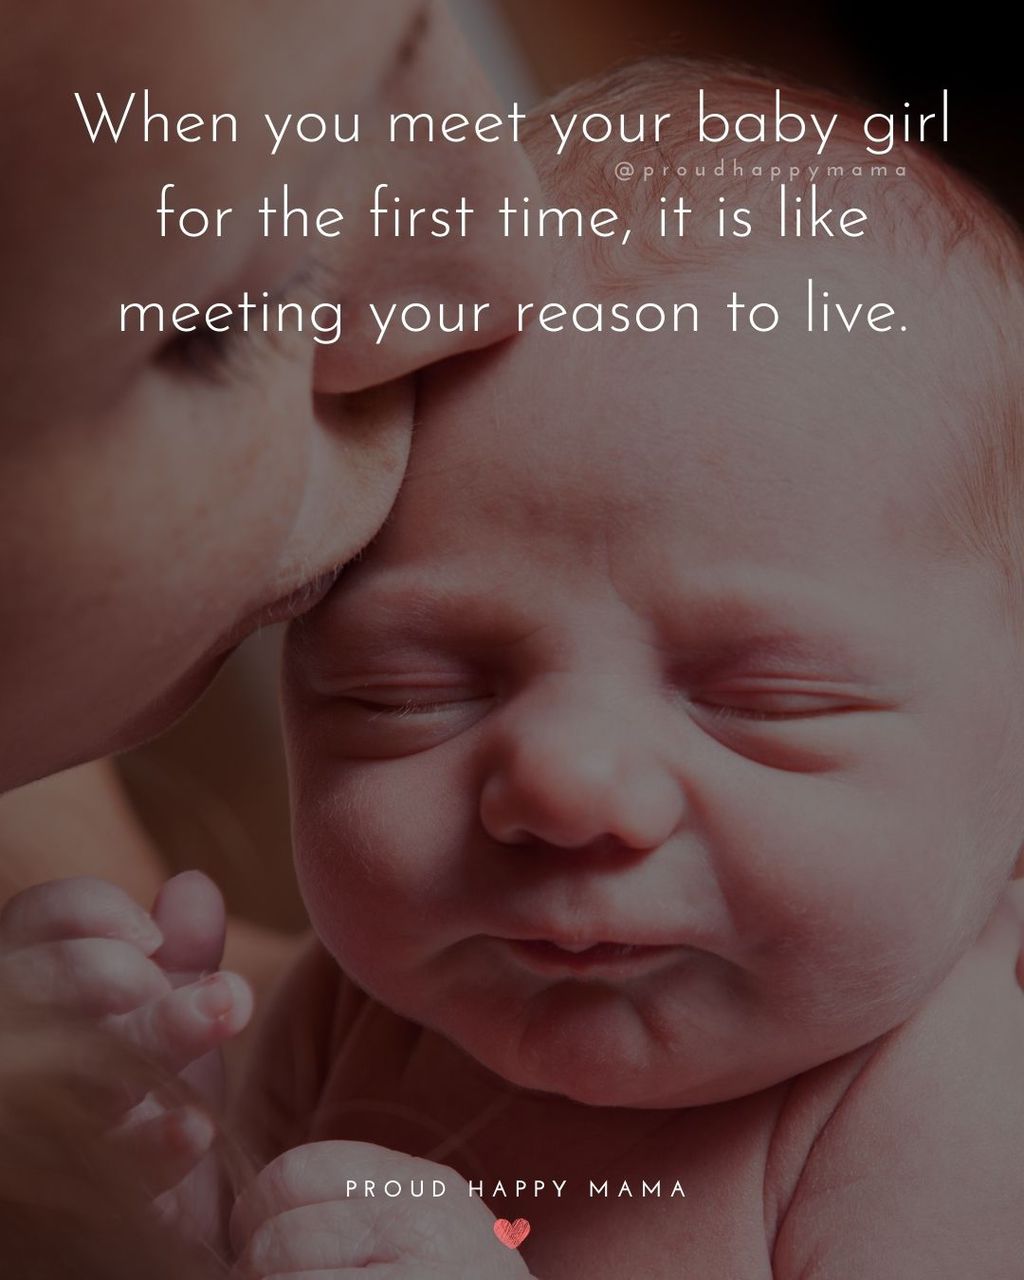 Baby Girl Quotes - When you meet your baby girl for the first time, it is like meeting your reason to live.